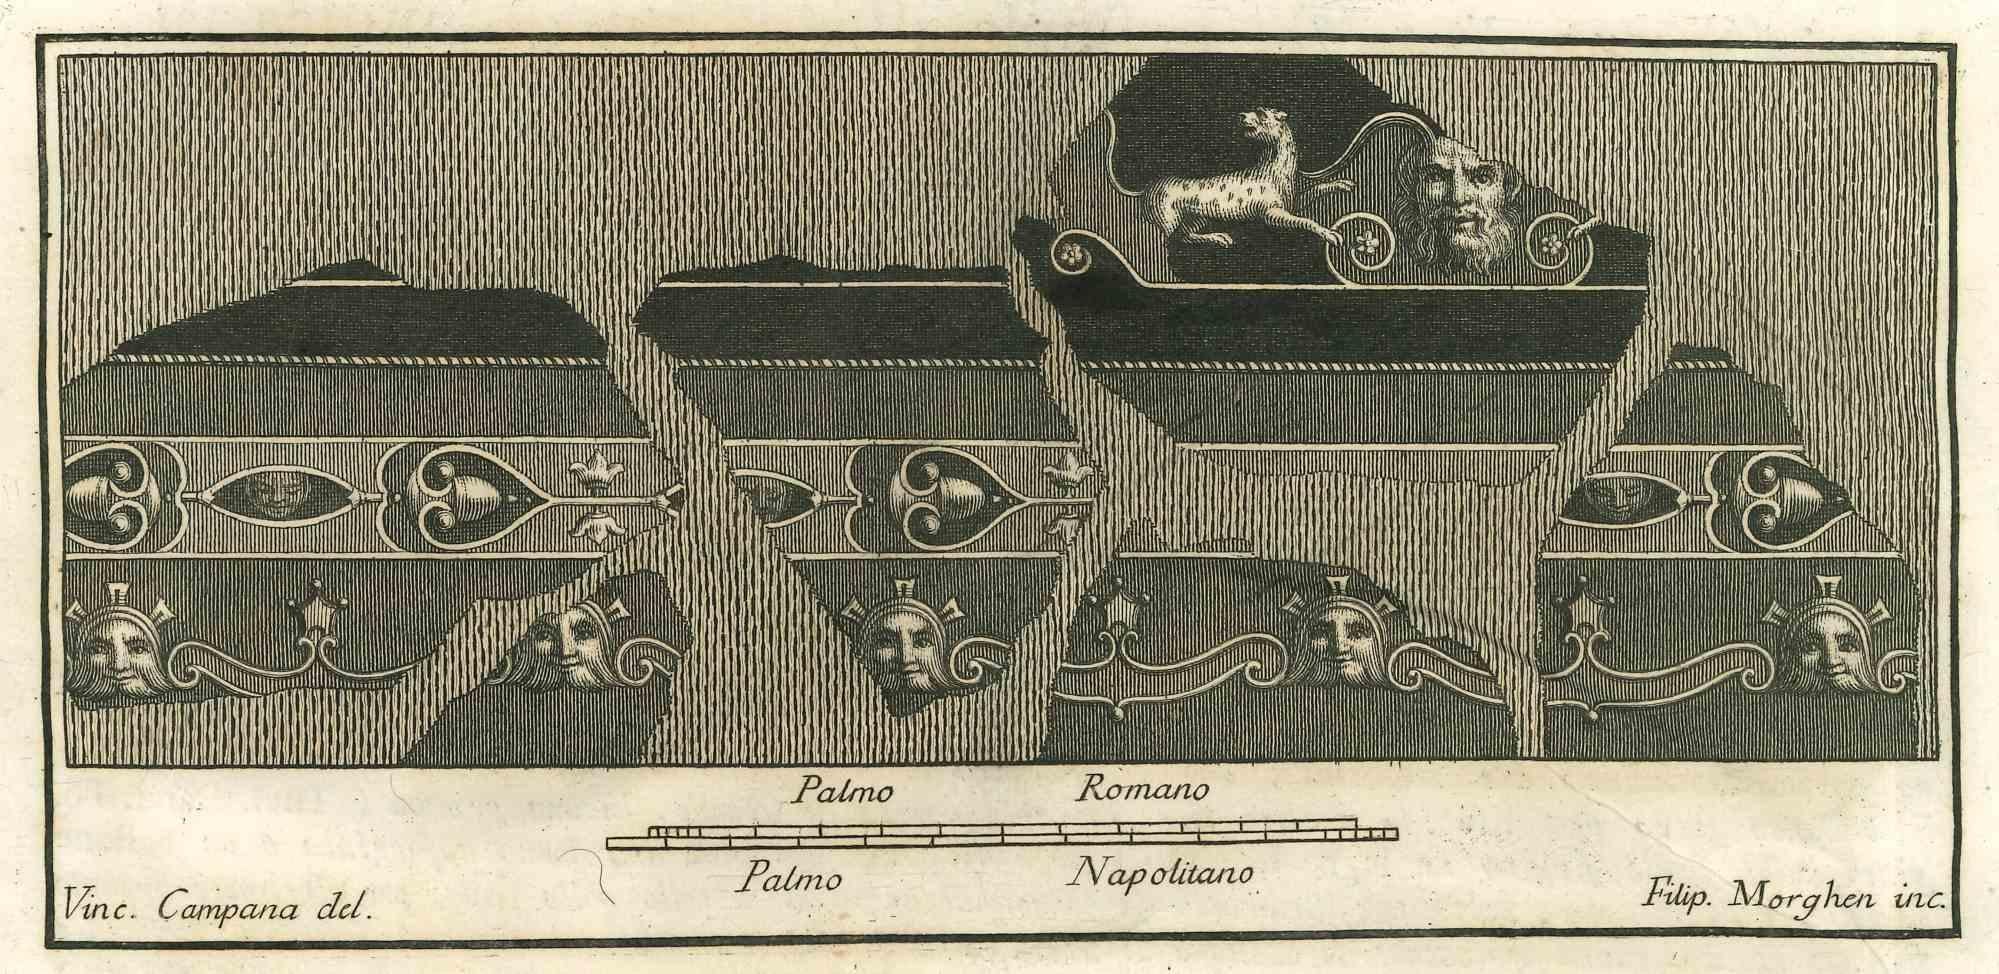 Decorative Wall Fresco from "Antiquities of Herculaneum" is an etching on paper realized by Filippo Morghen in the 18th Century.

Signed on the plate.

Good conditions.

The etching belongs to the print suite “Antiquities of Herculaneum Exposed”